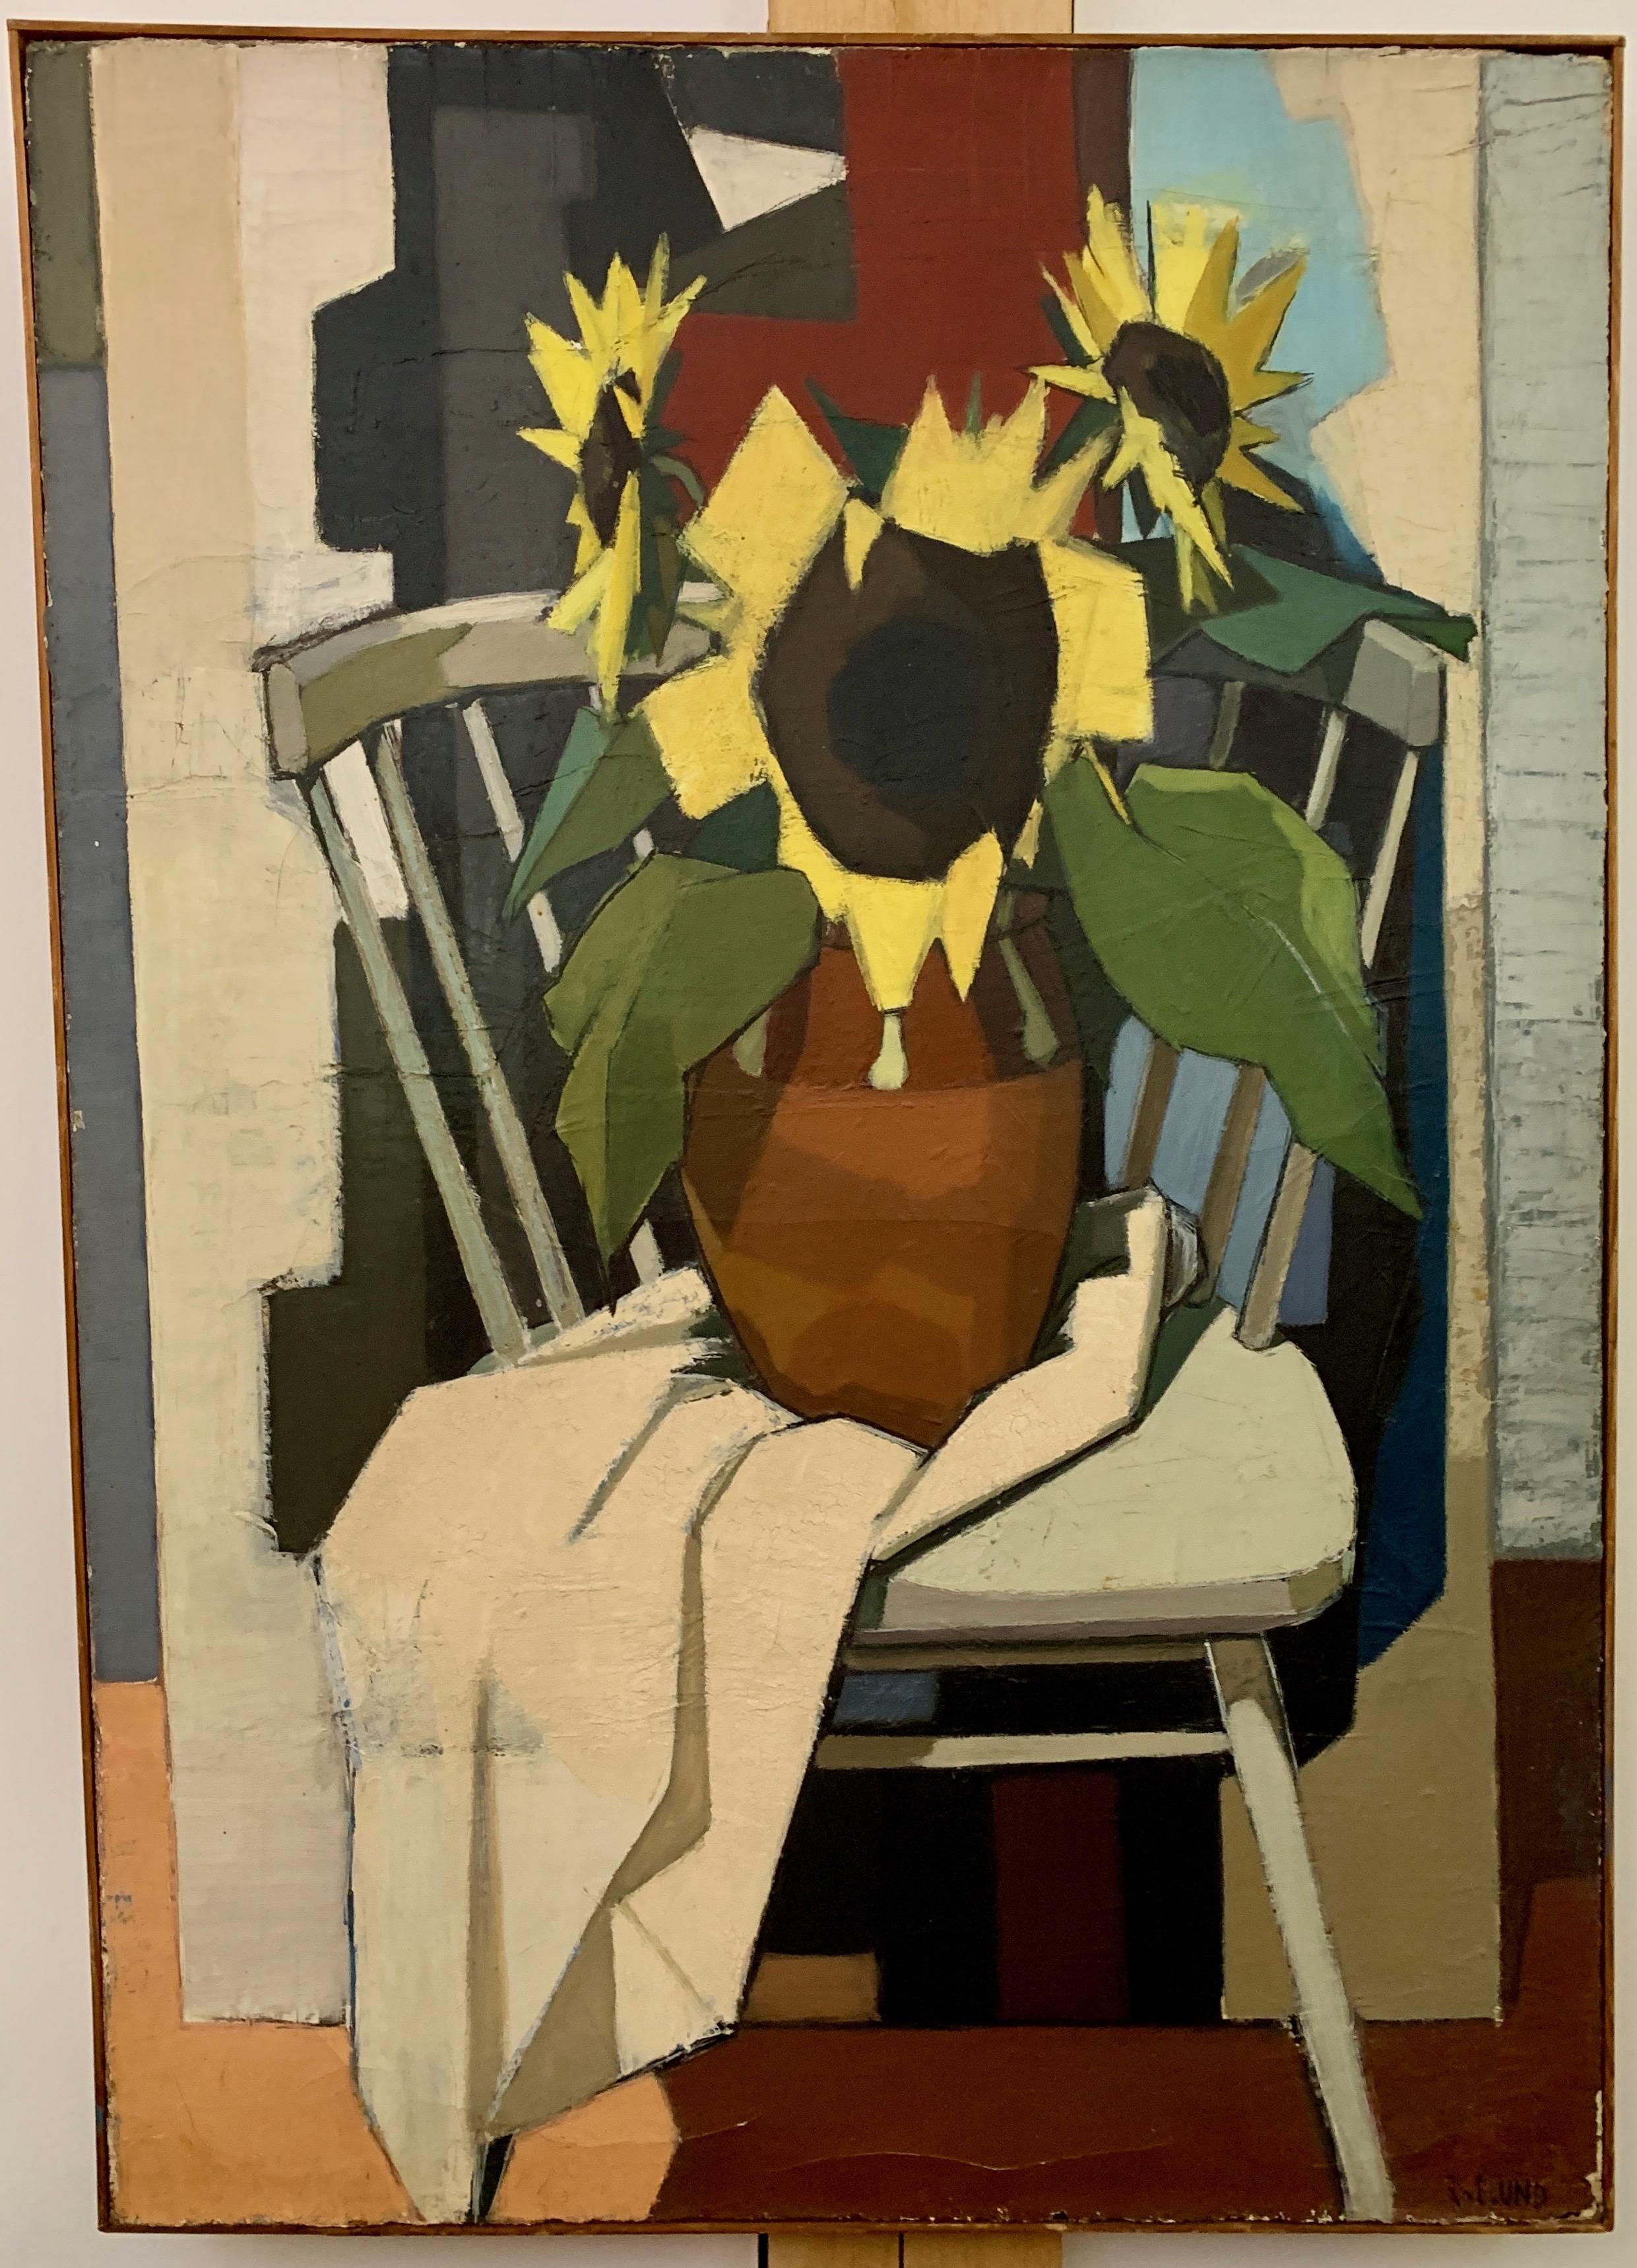 Edmond Lund Abstract Painting - Modernist 1950's mid century still life of Sunflowers in an interior